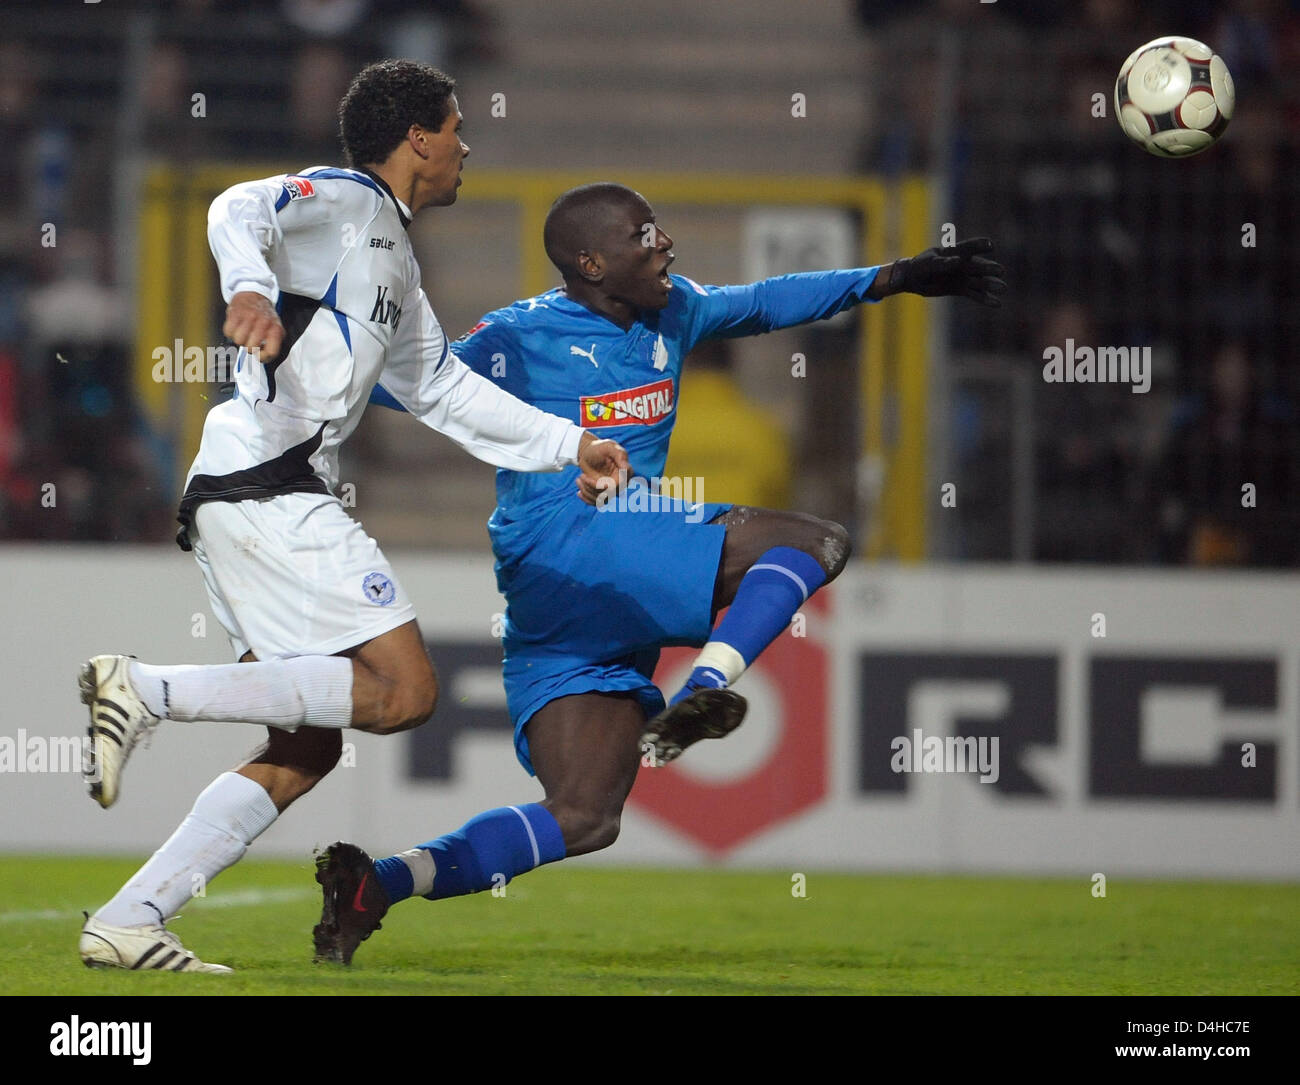 Bielefeld?s Michael Lamey (L) challenges Hoffenheim?s Demba Ba (R) in the German Bundesliga match TSG 1899 Hoffenheim v Arminia Bielefeld at Carl Benz stadium of Mannheim, Germany, 29 November 2008. Hoffenheim defeated Bielefeld 3-0. Photo: RONALD WITTEK  (ATTENTION: EMBARGO CONDITIONS! The DFL permits the further utilisation of the pictures in IPTV, mobile services and other new t Stock Photo